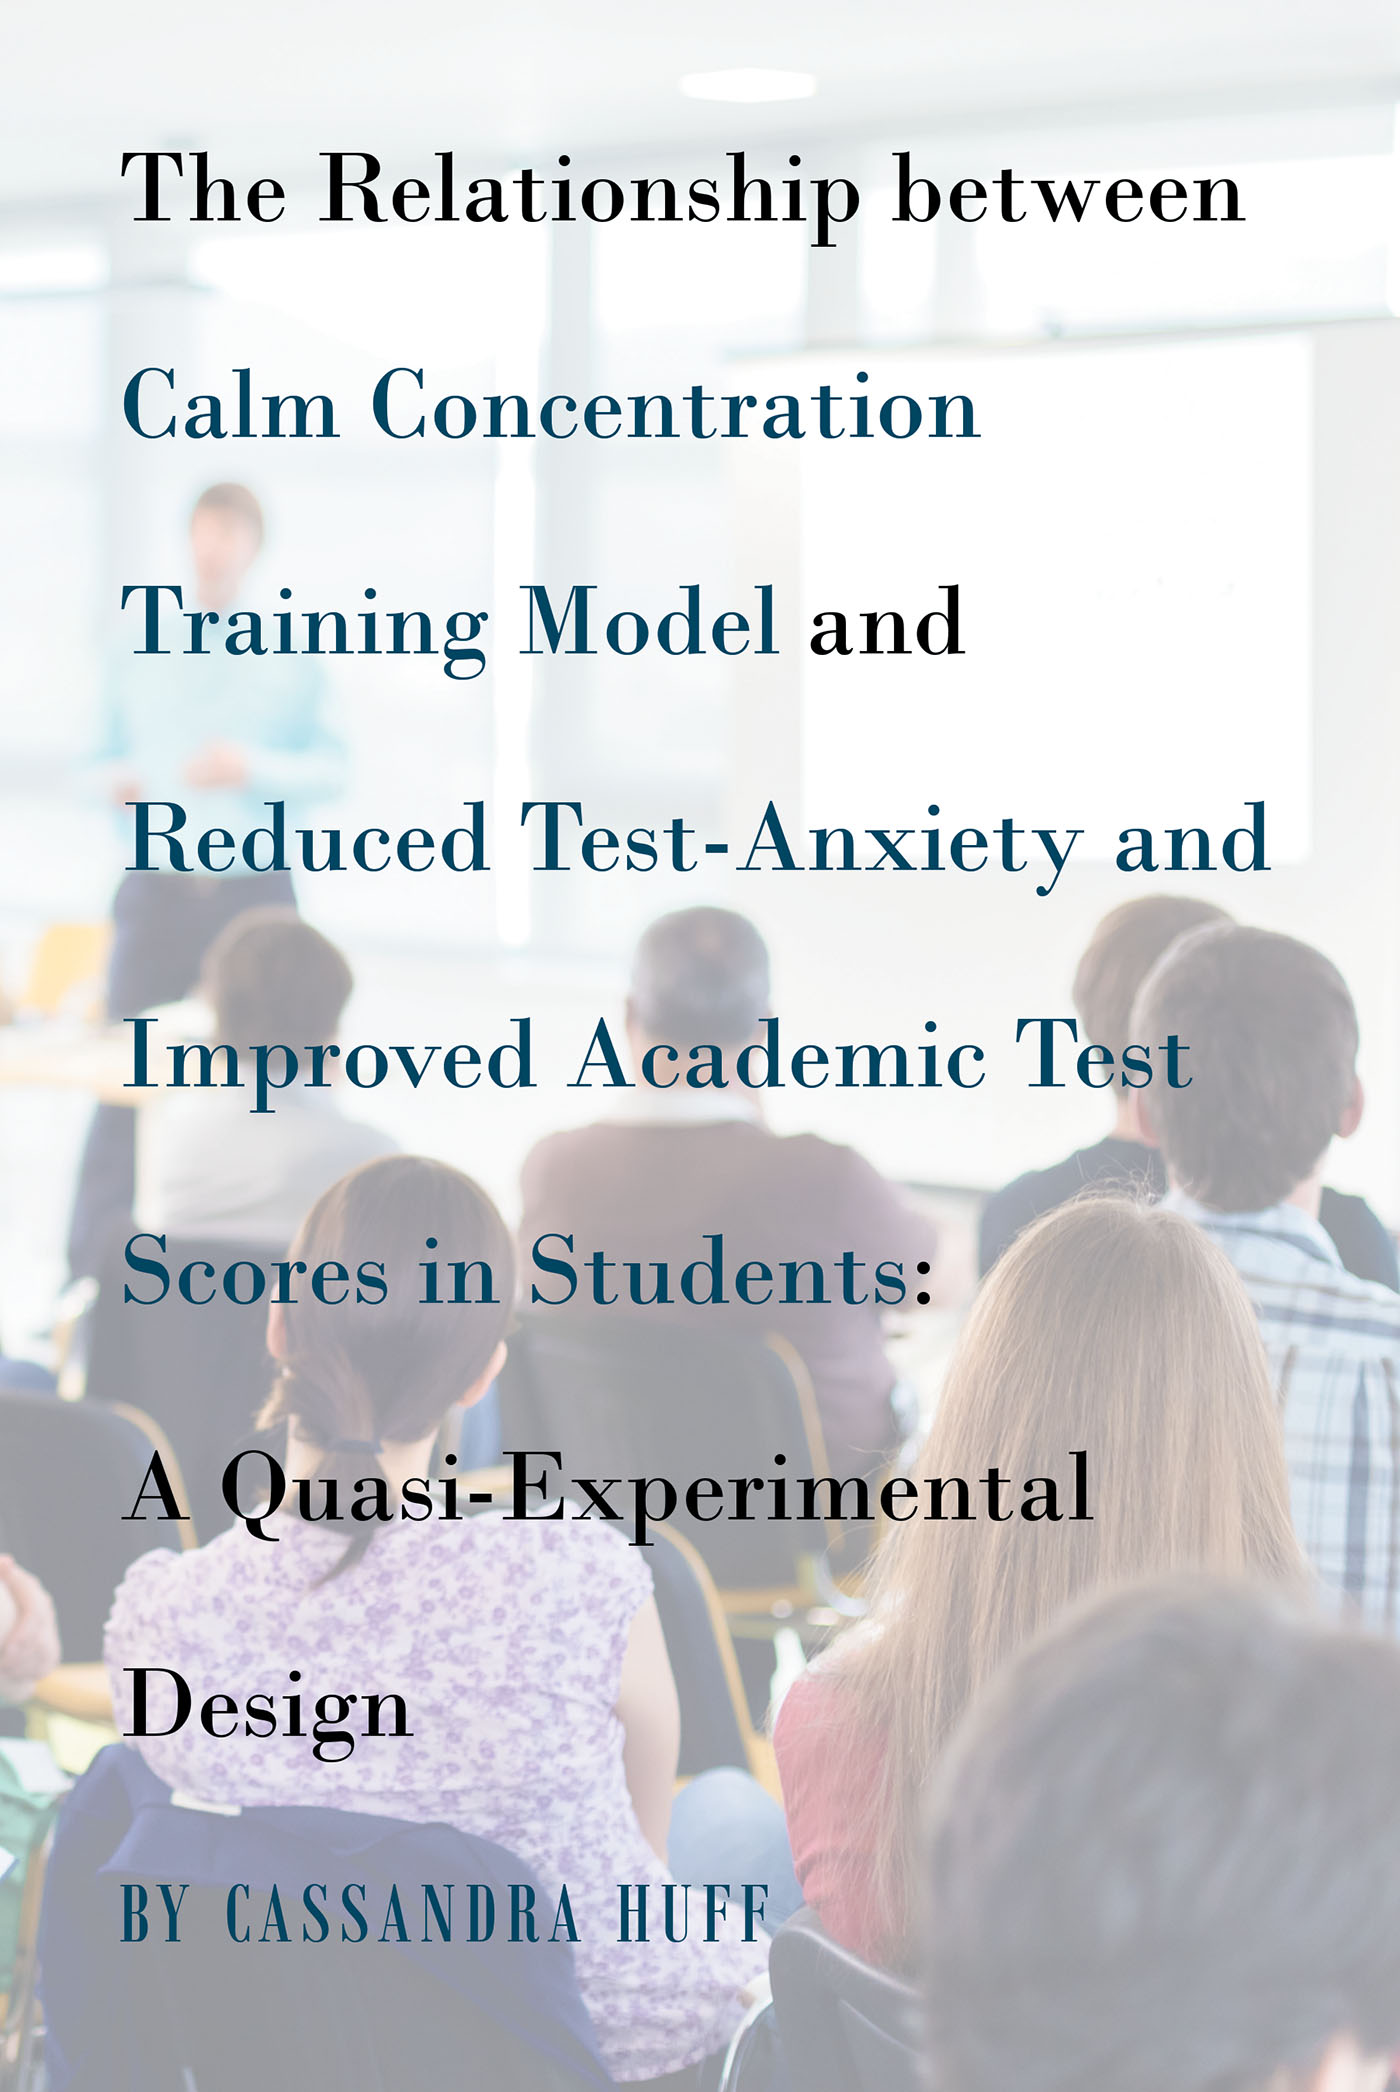 The Relationship between Calm Concentration Training Model and Reduced Test-Anxiety and Improved Academic Test Scores in Students Cover Image